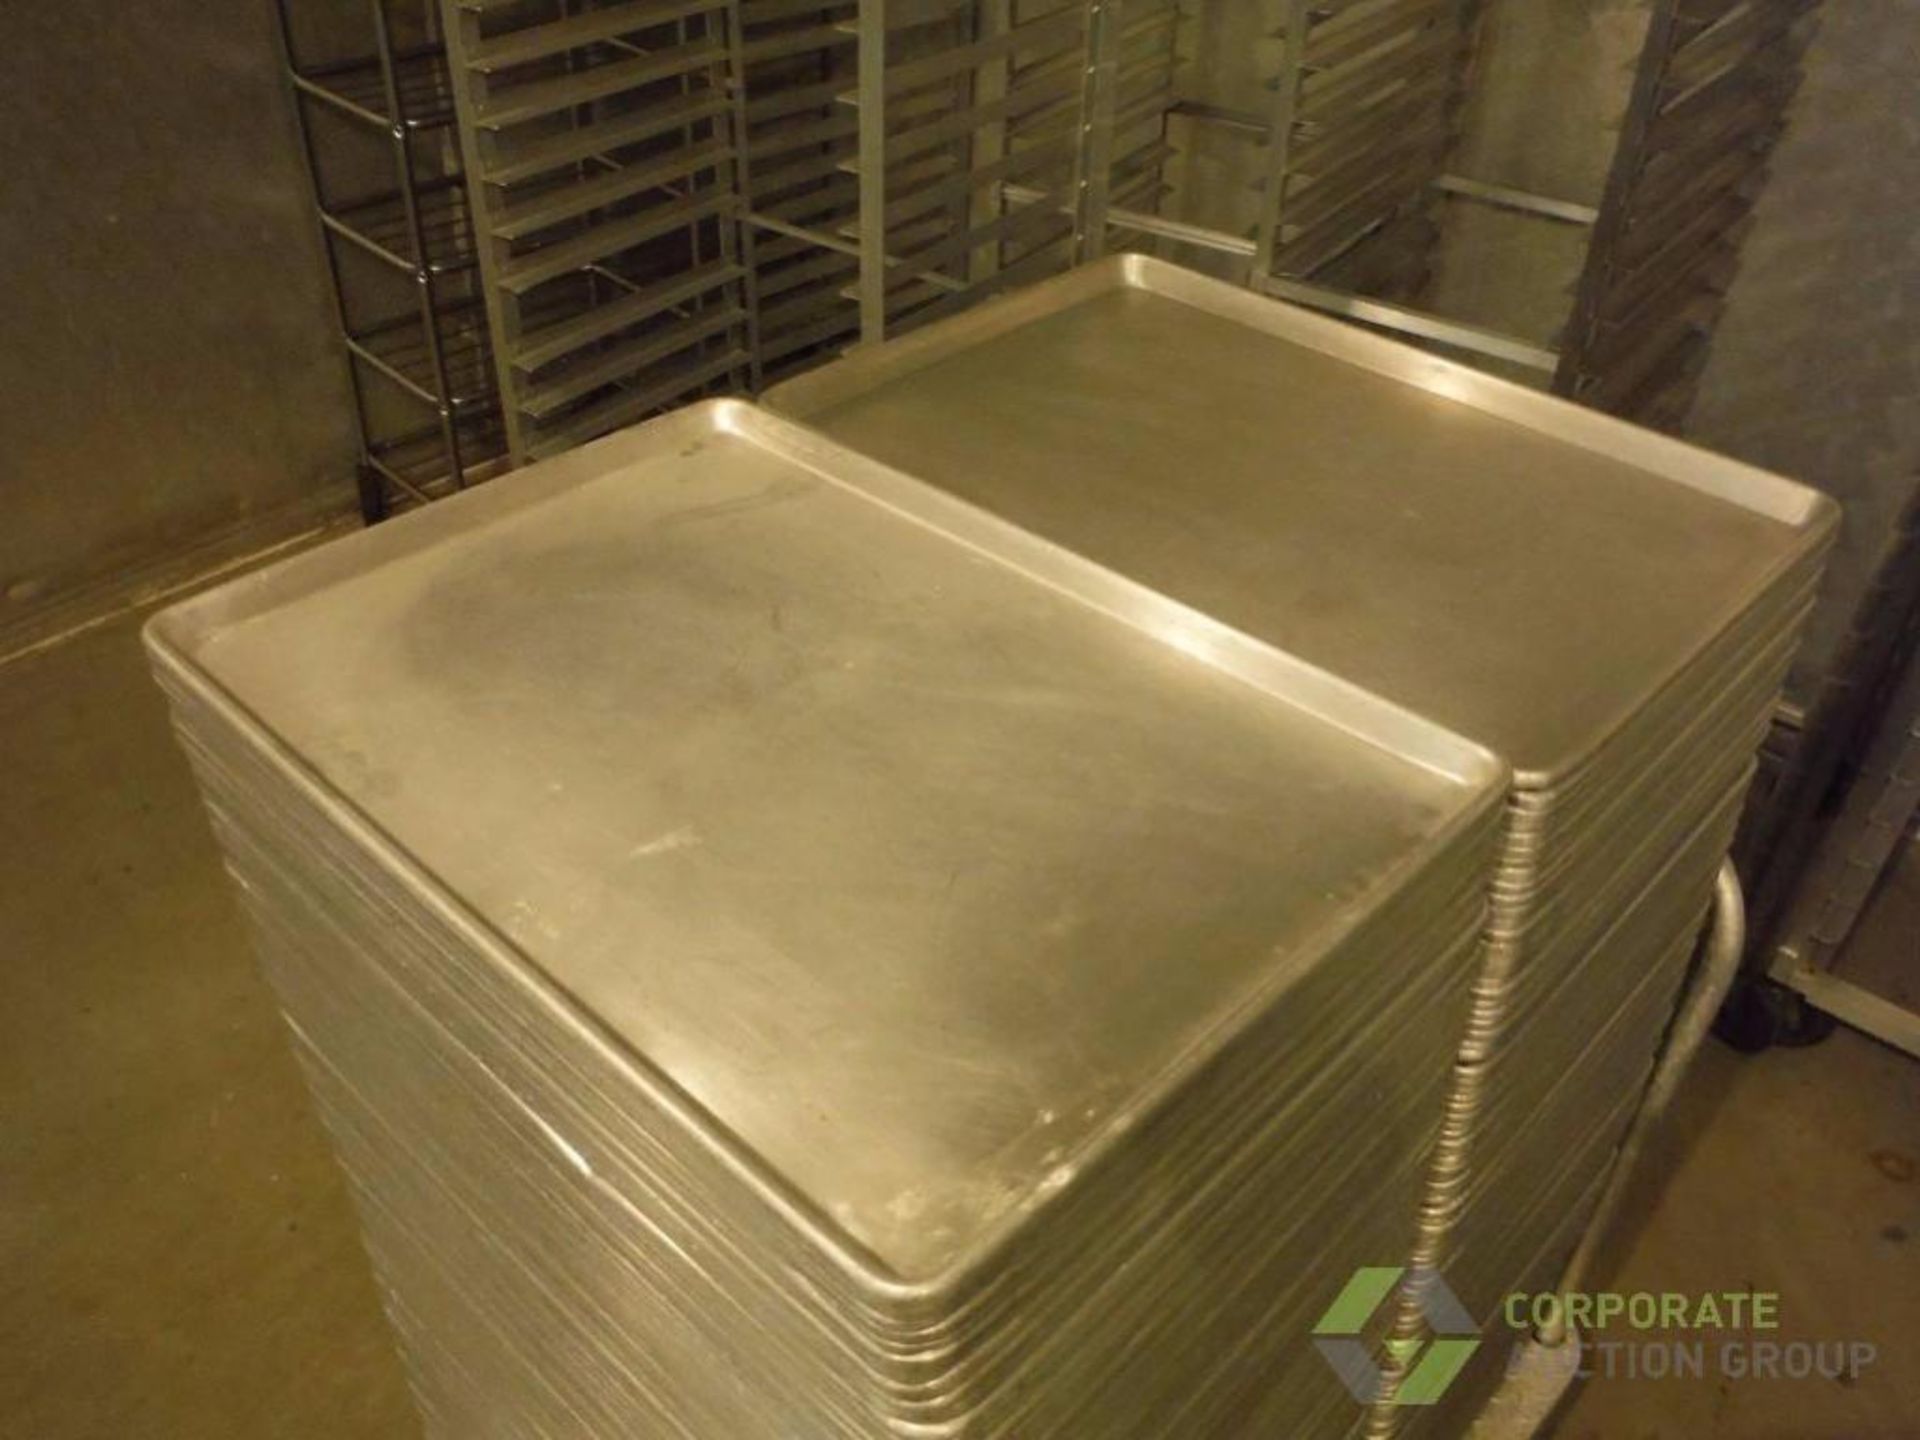 Approx. (225) - 26 in x 18 in x 1 in deep aluminum pans. **(Located in North Dakota)** Rigging Fee: - Image 2 of 3